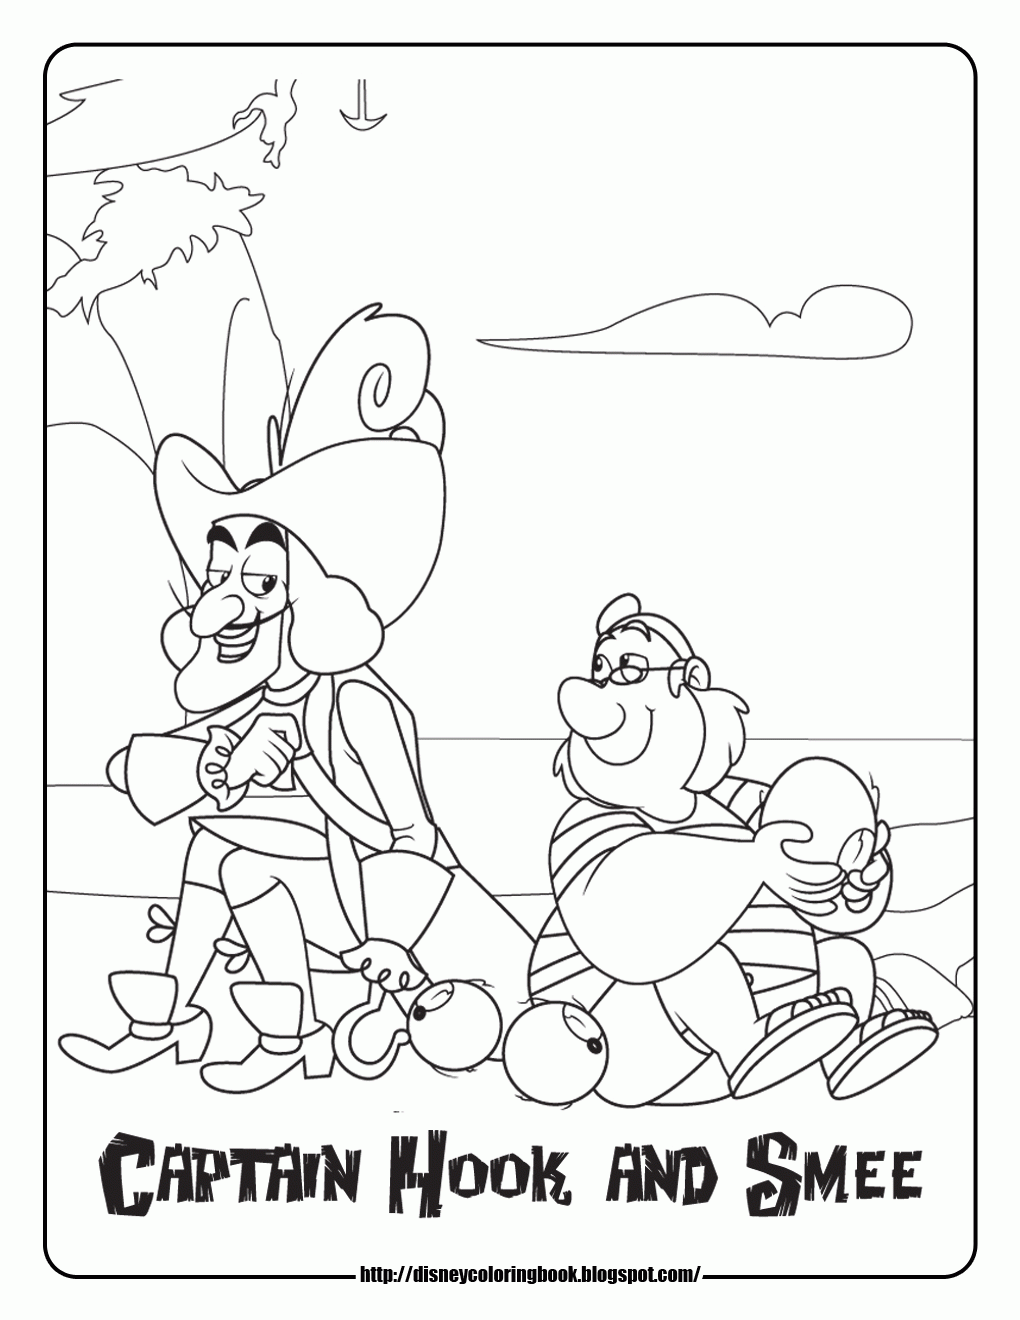 Jake and the Neverland Pirates 2: Free Disney Coloring Sheets ...